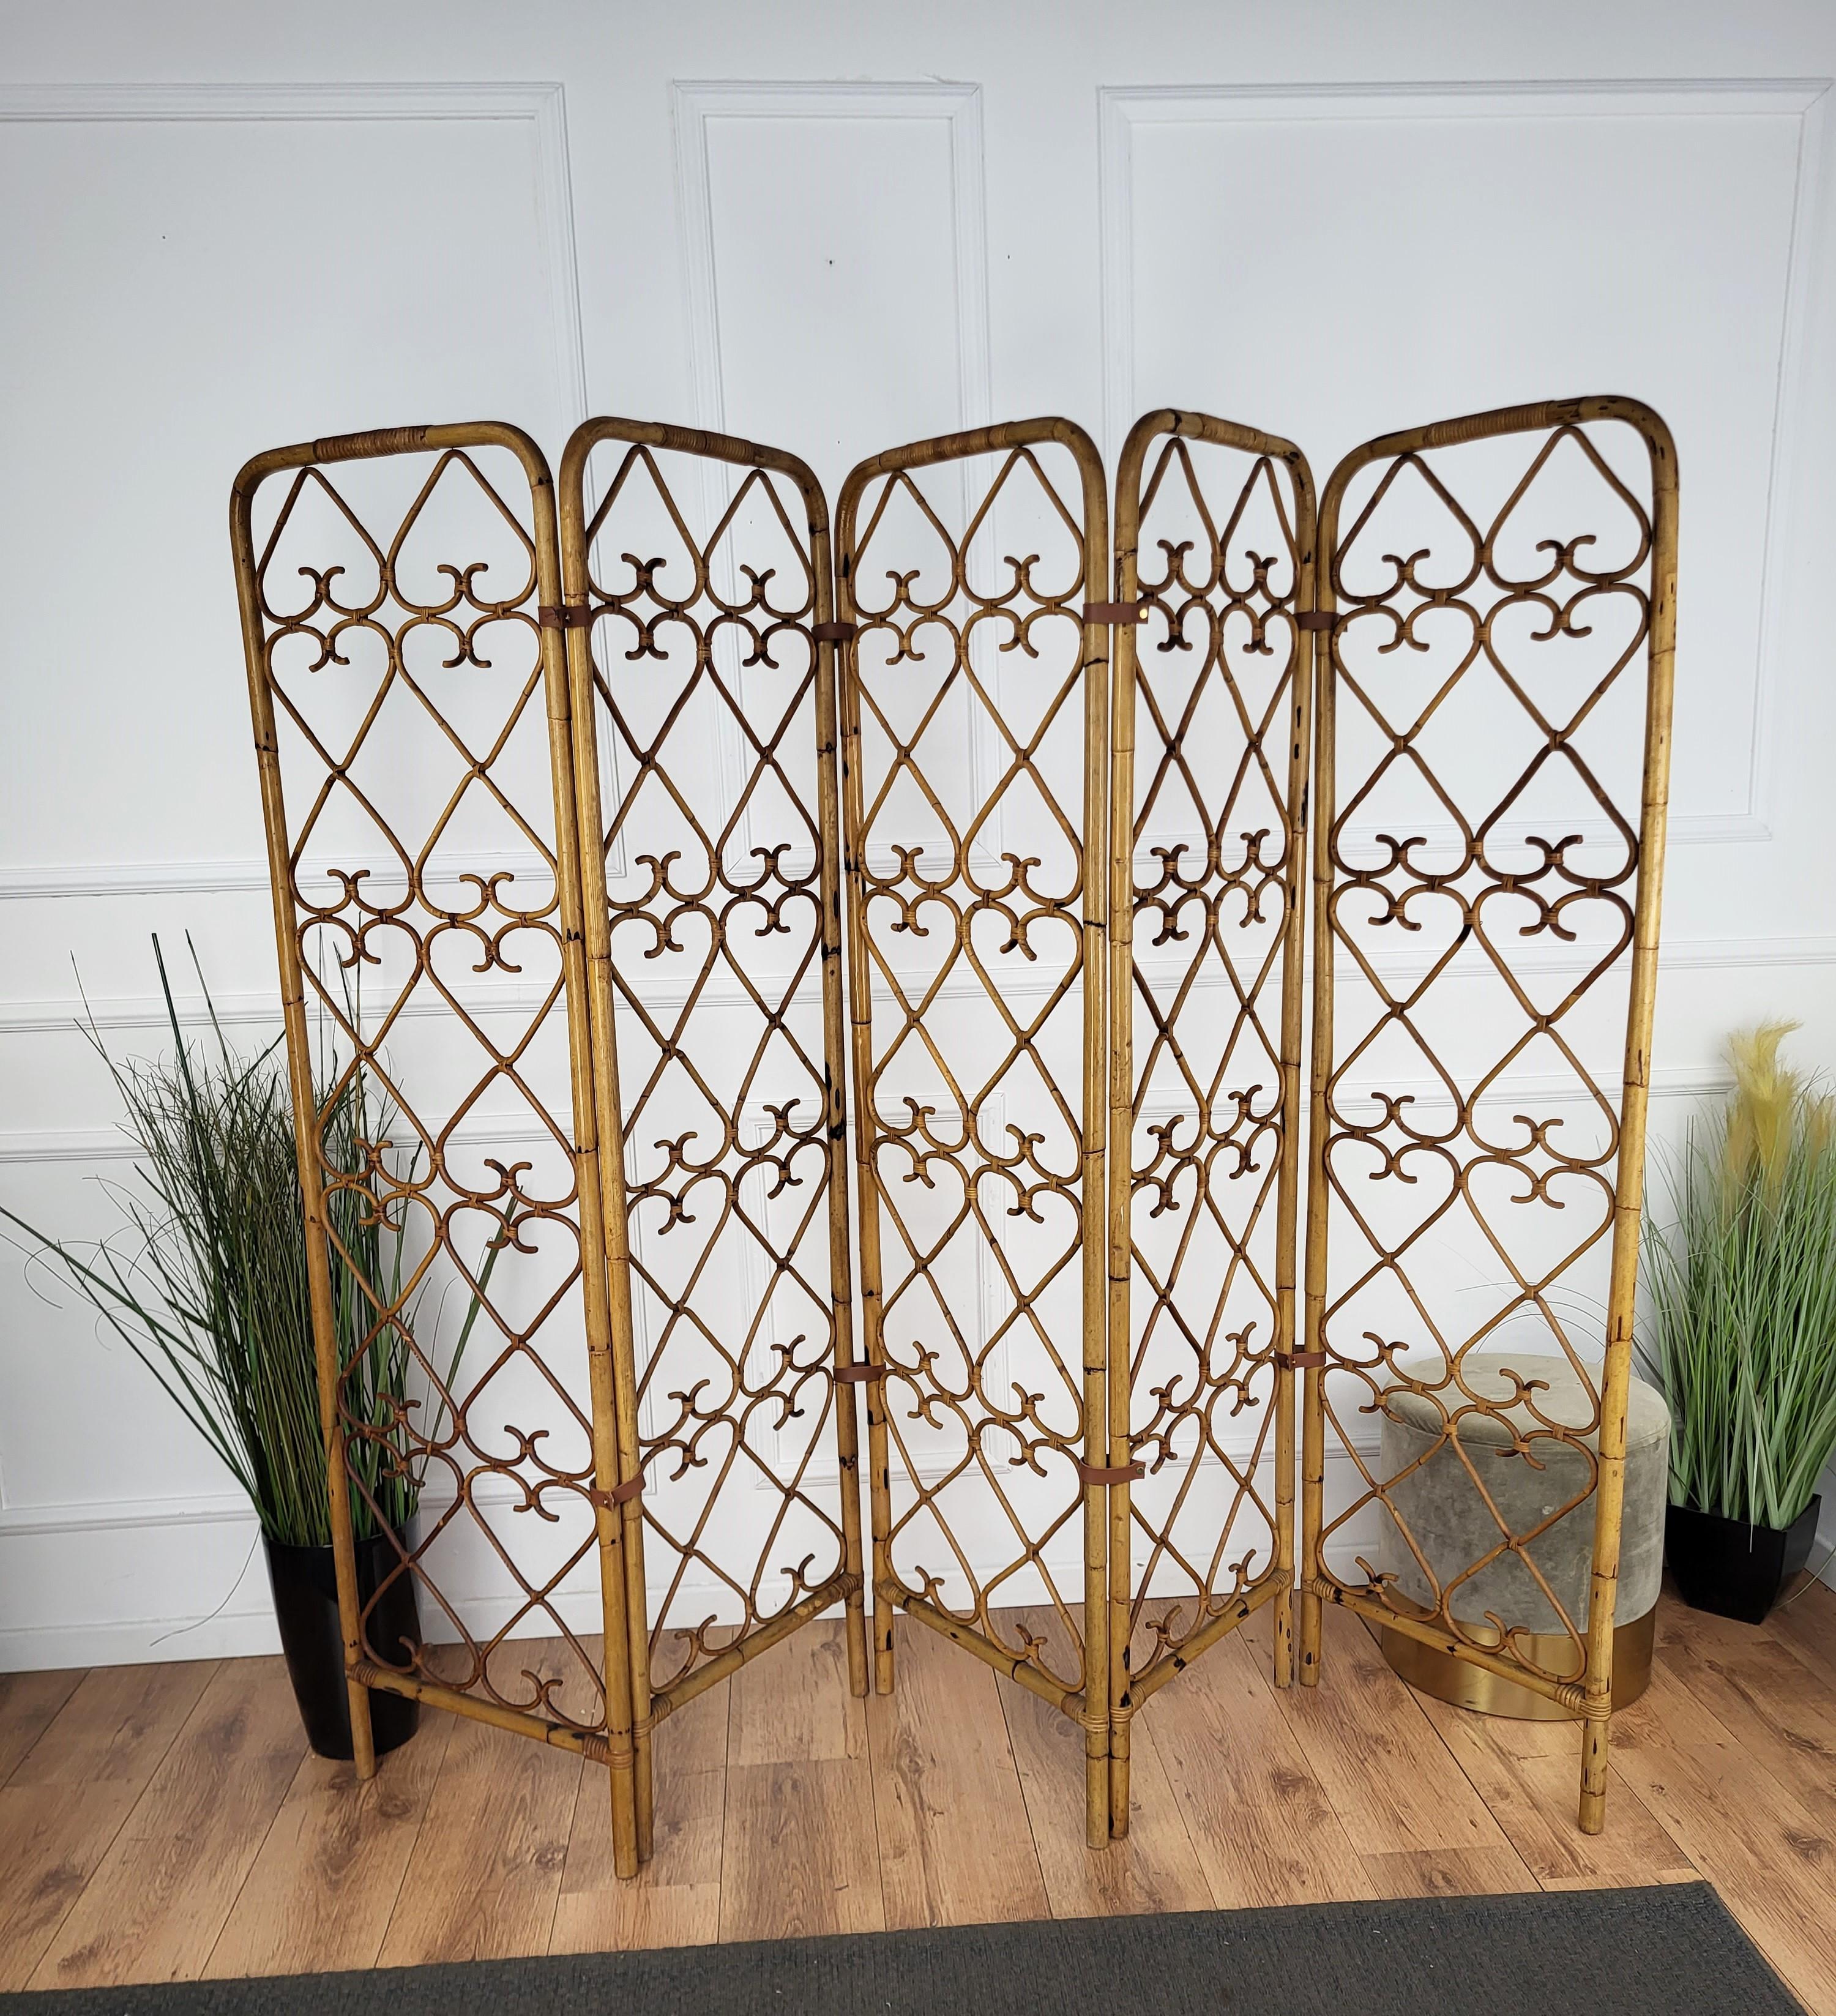 Beautiful vintage Italian bamboo divider screen from the 1970s. Handmade with meticulous artistry, this bamboo cane room divider features a captivating hearts motif repeated pattern design. Connected with new brown leather hinges, this vintage piece